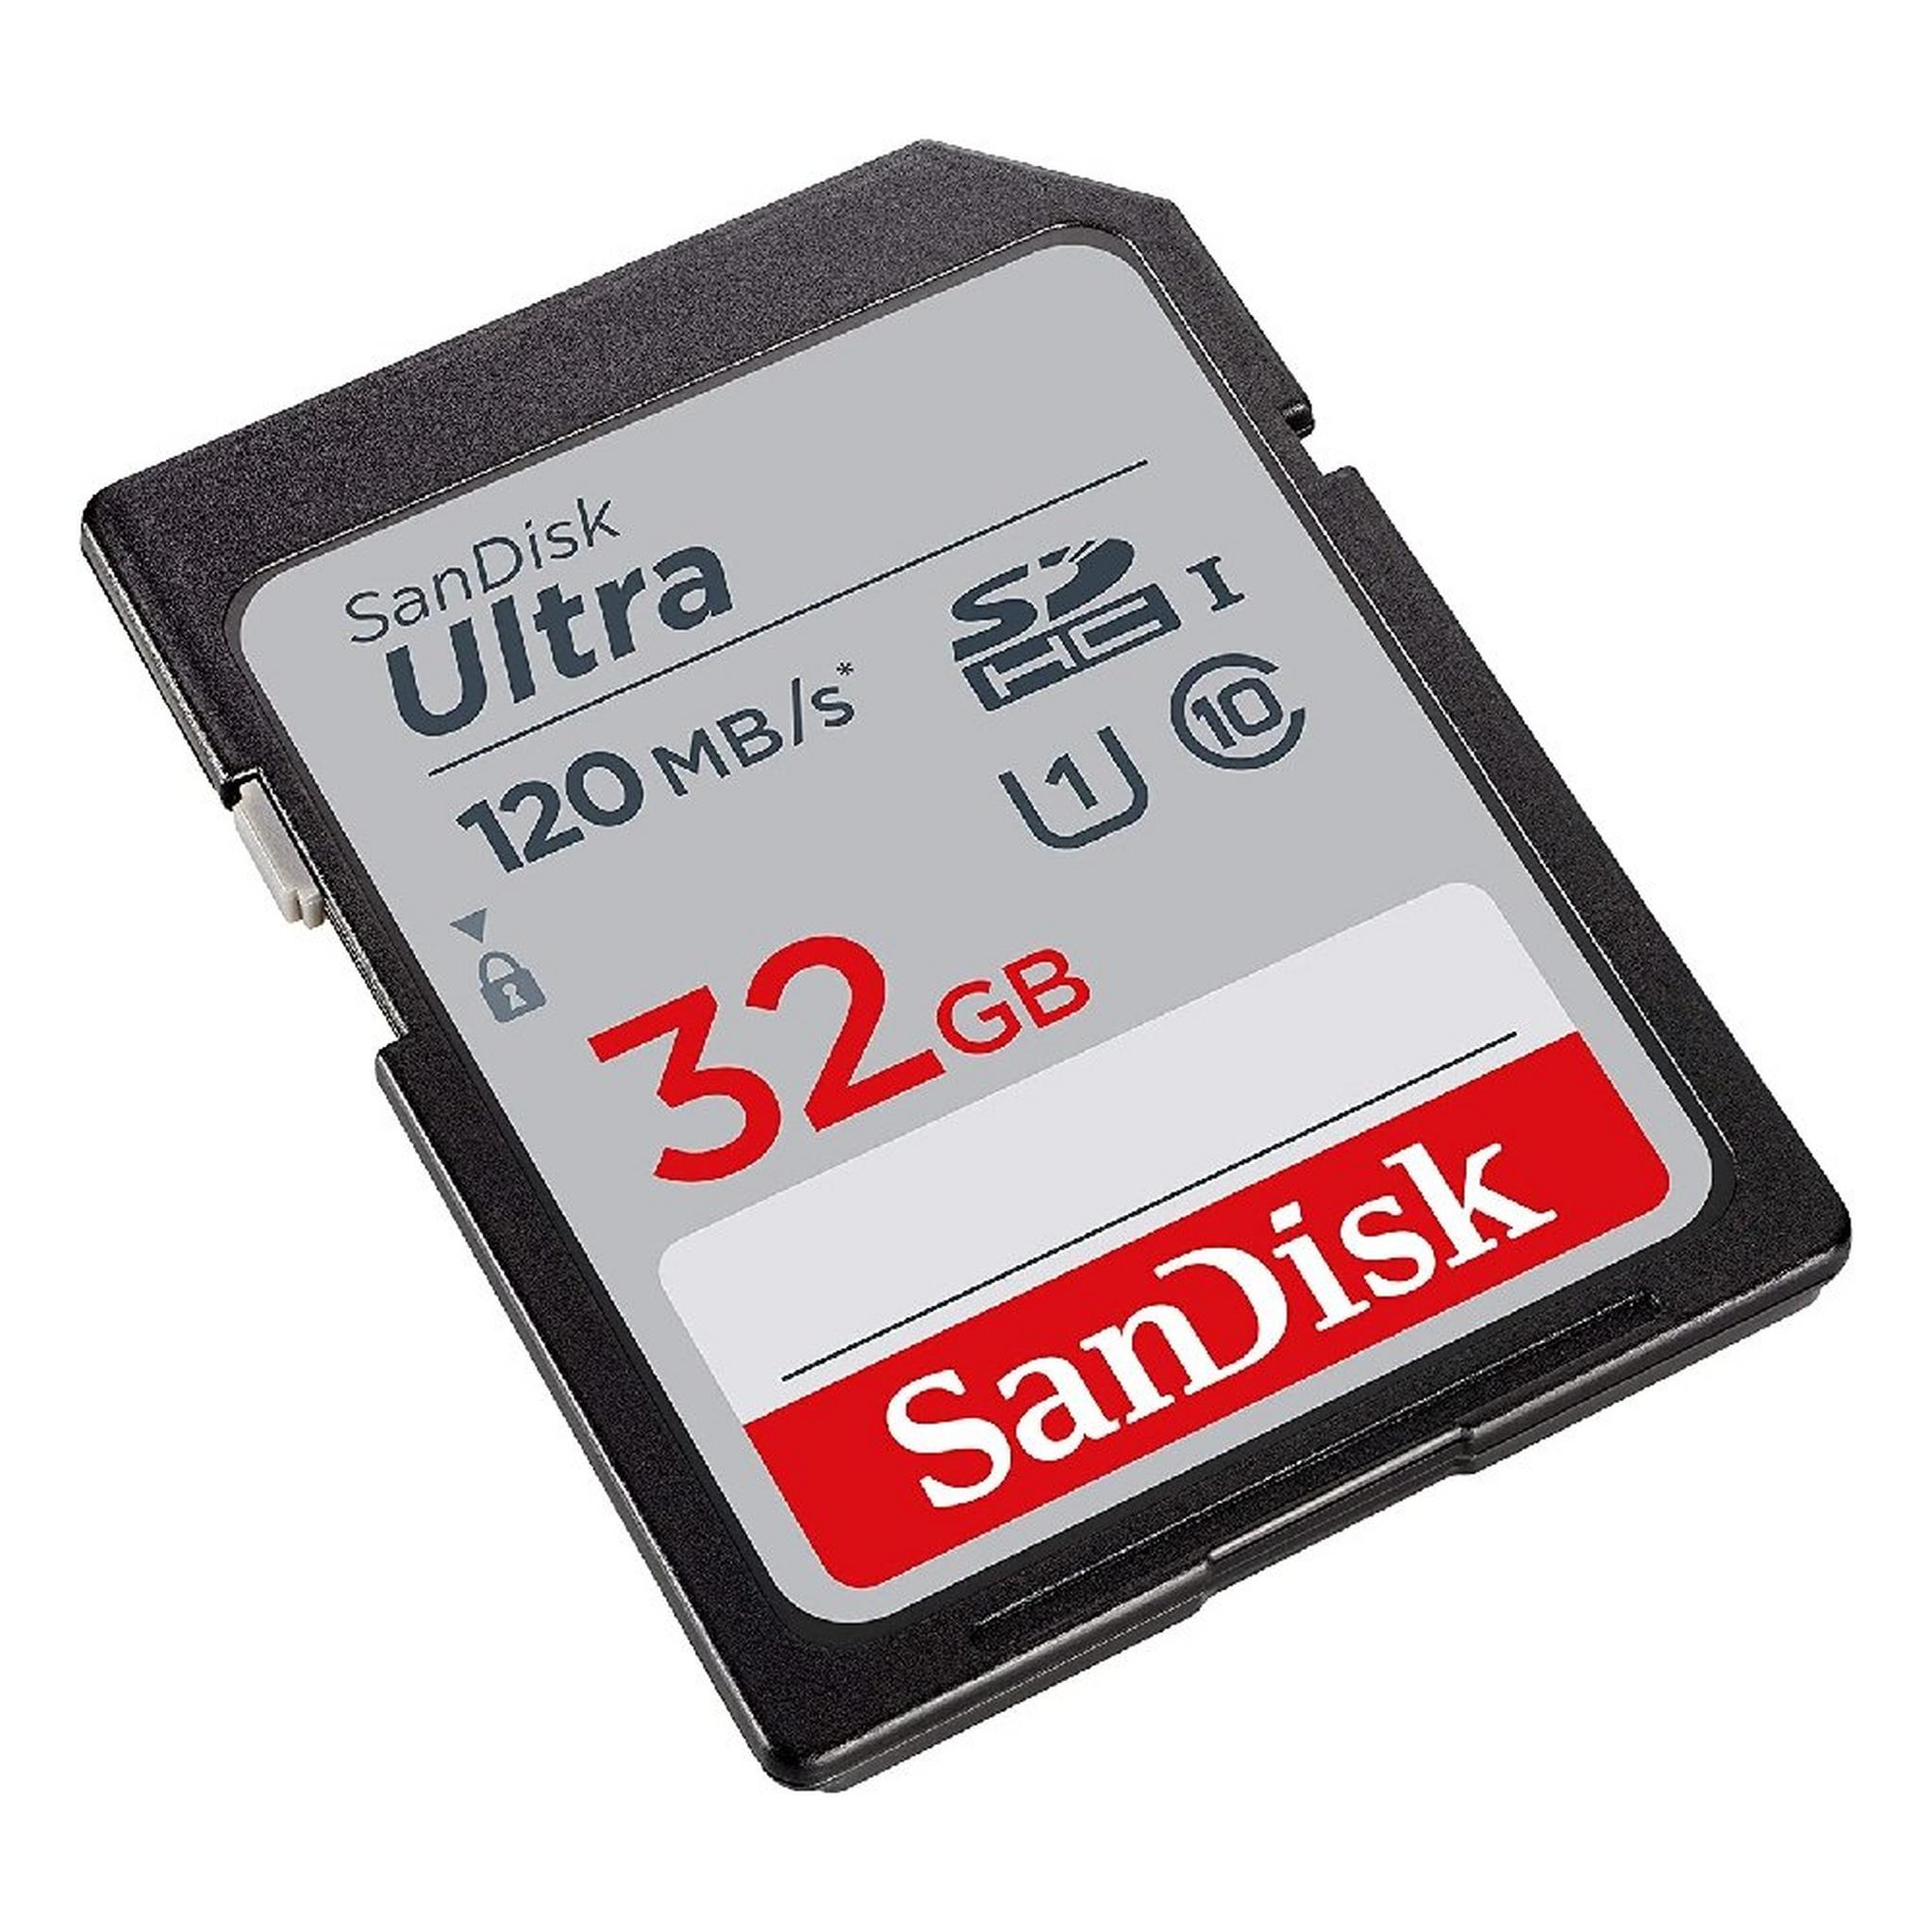 SanDisk 32GB Ultra SDHC UHS-I Memory Card - 120MB/s